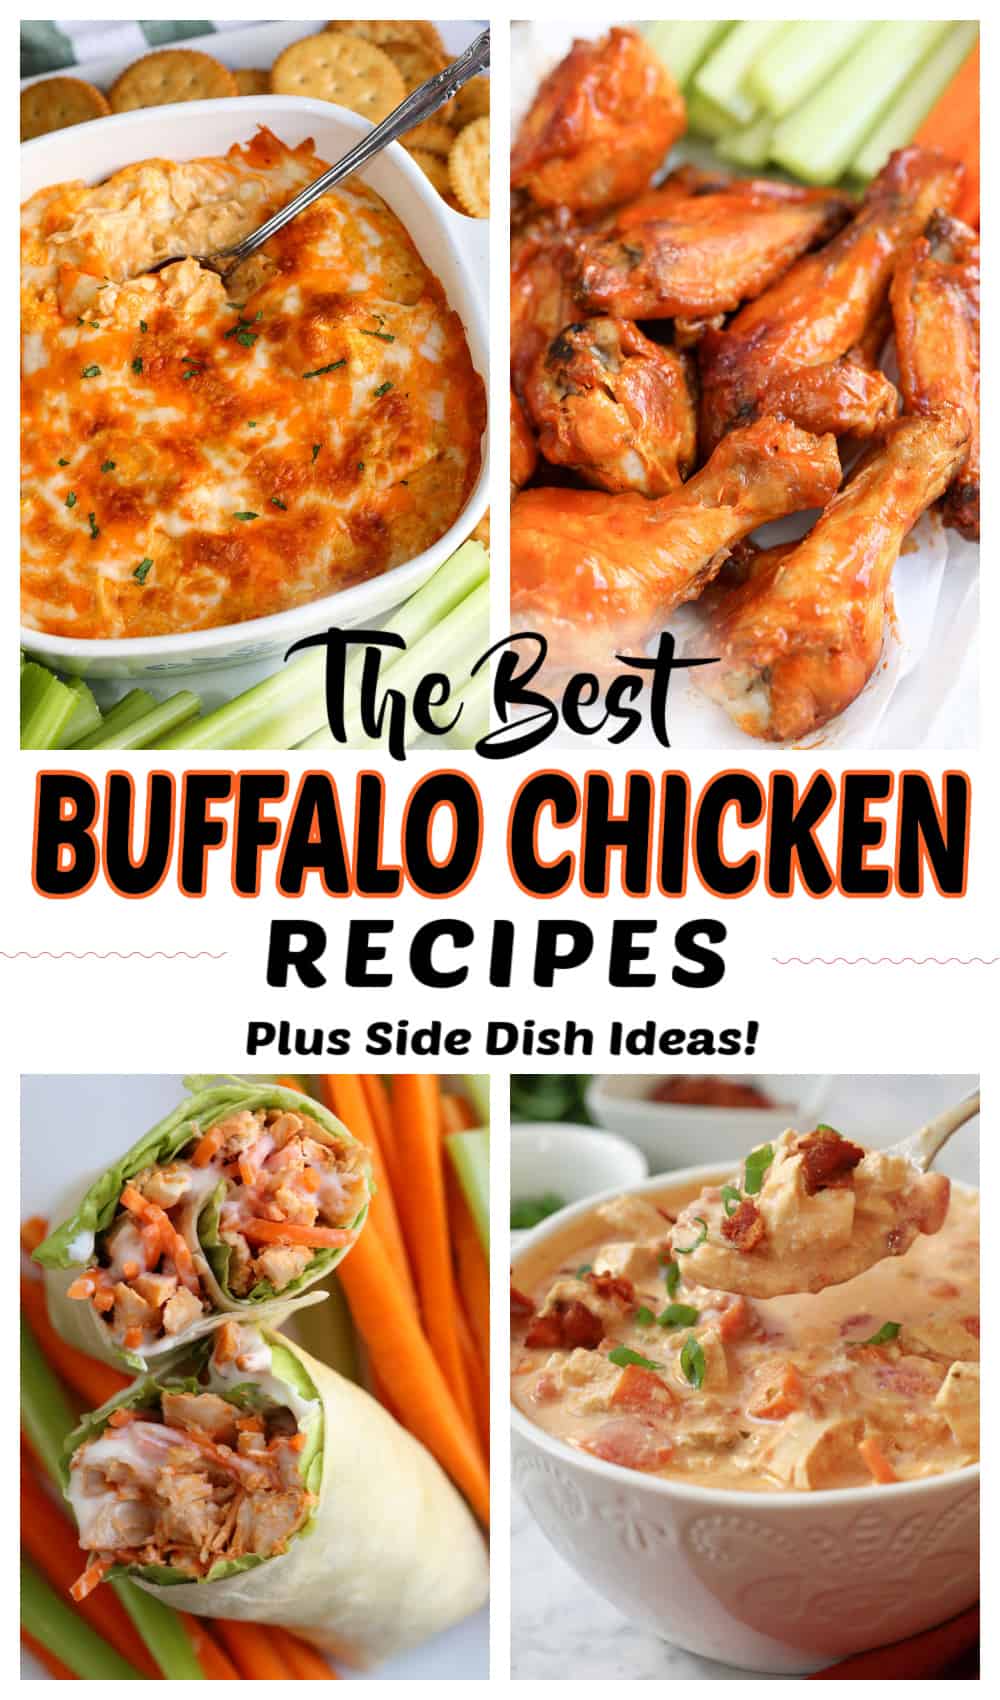 Buffalo Chicken Recipes for Game Day